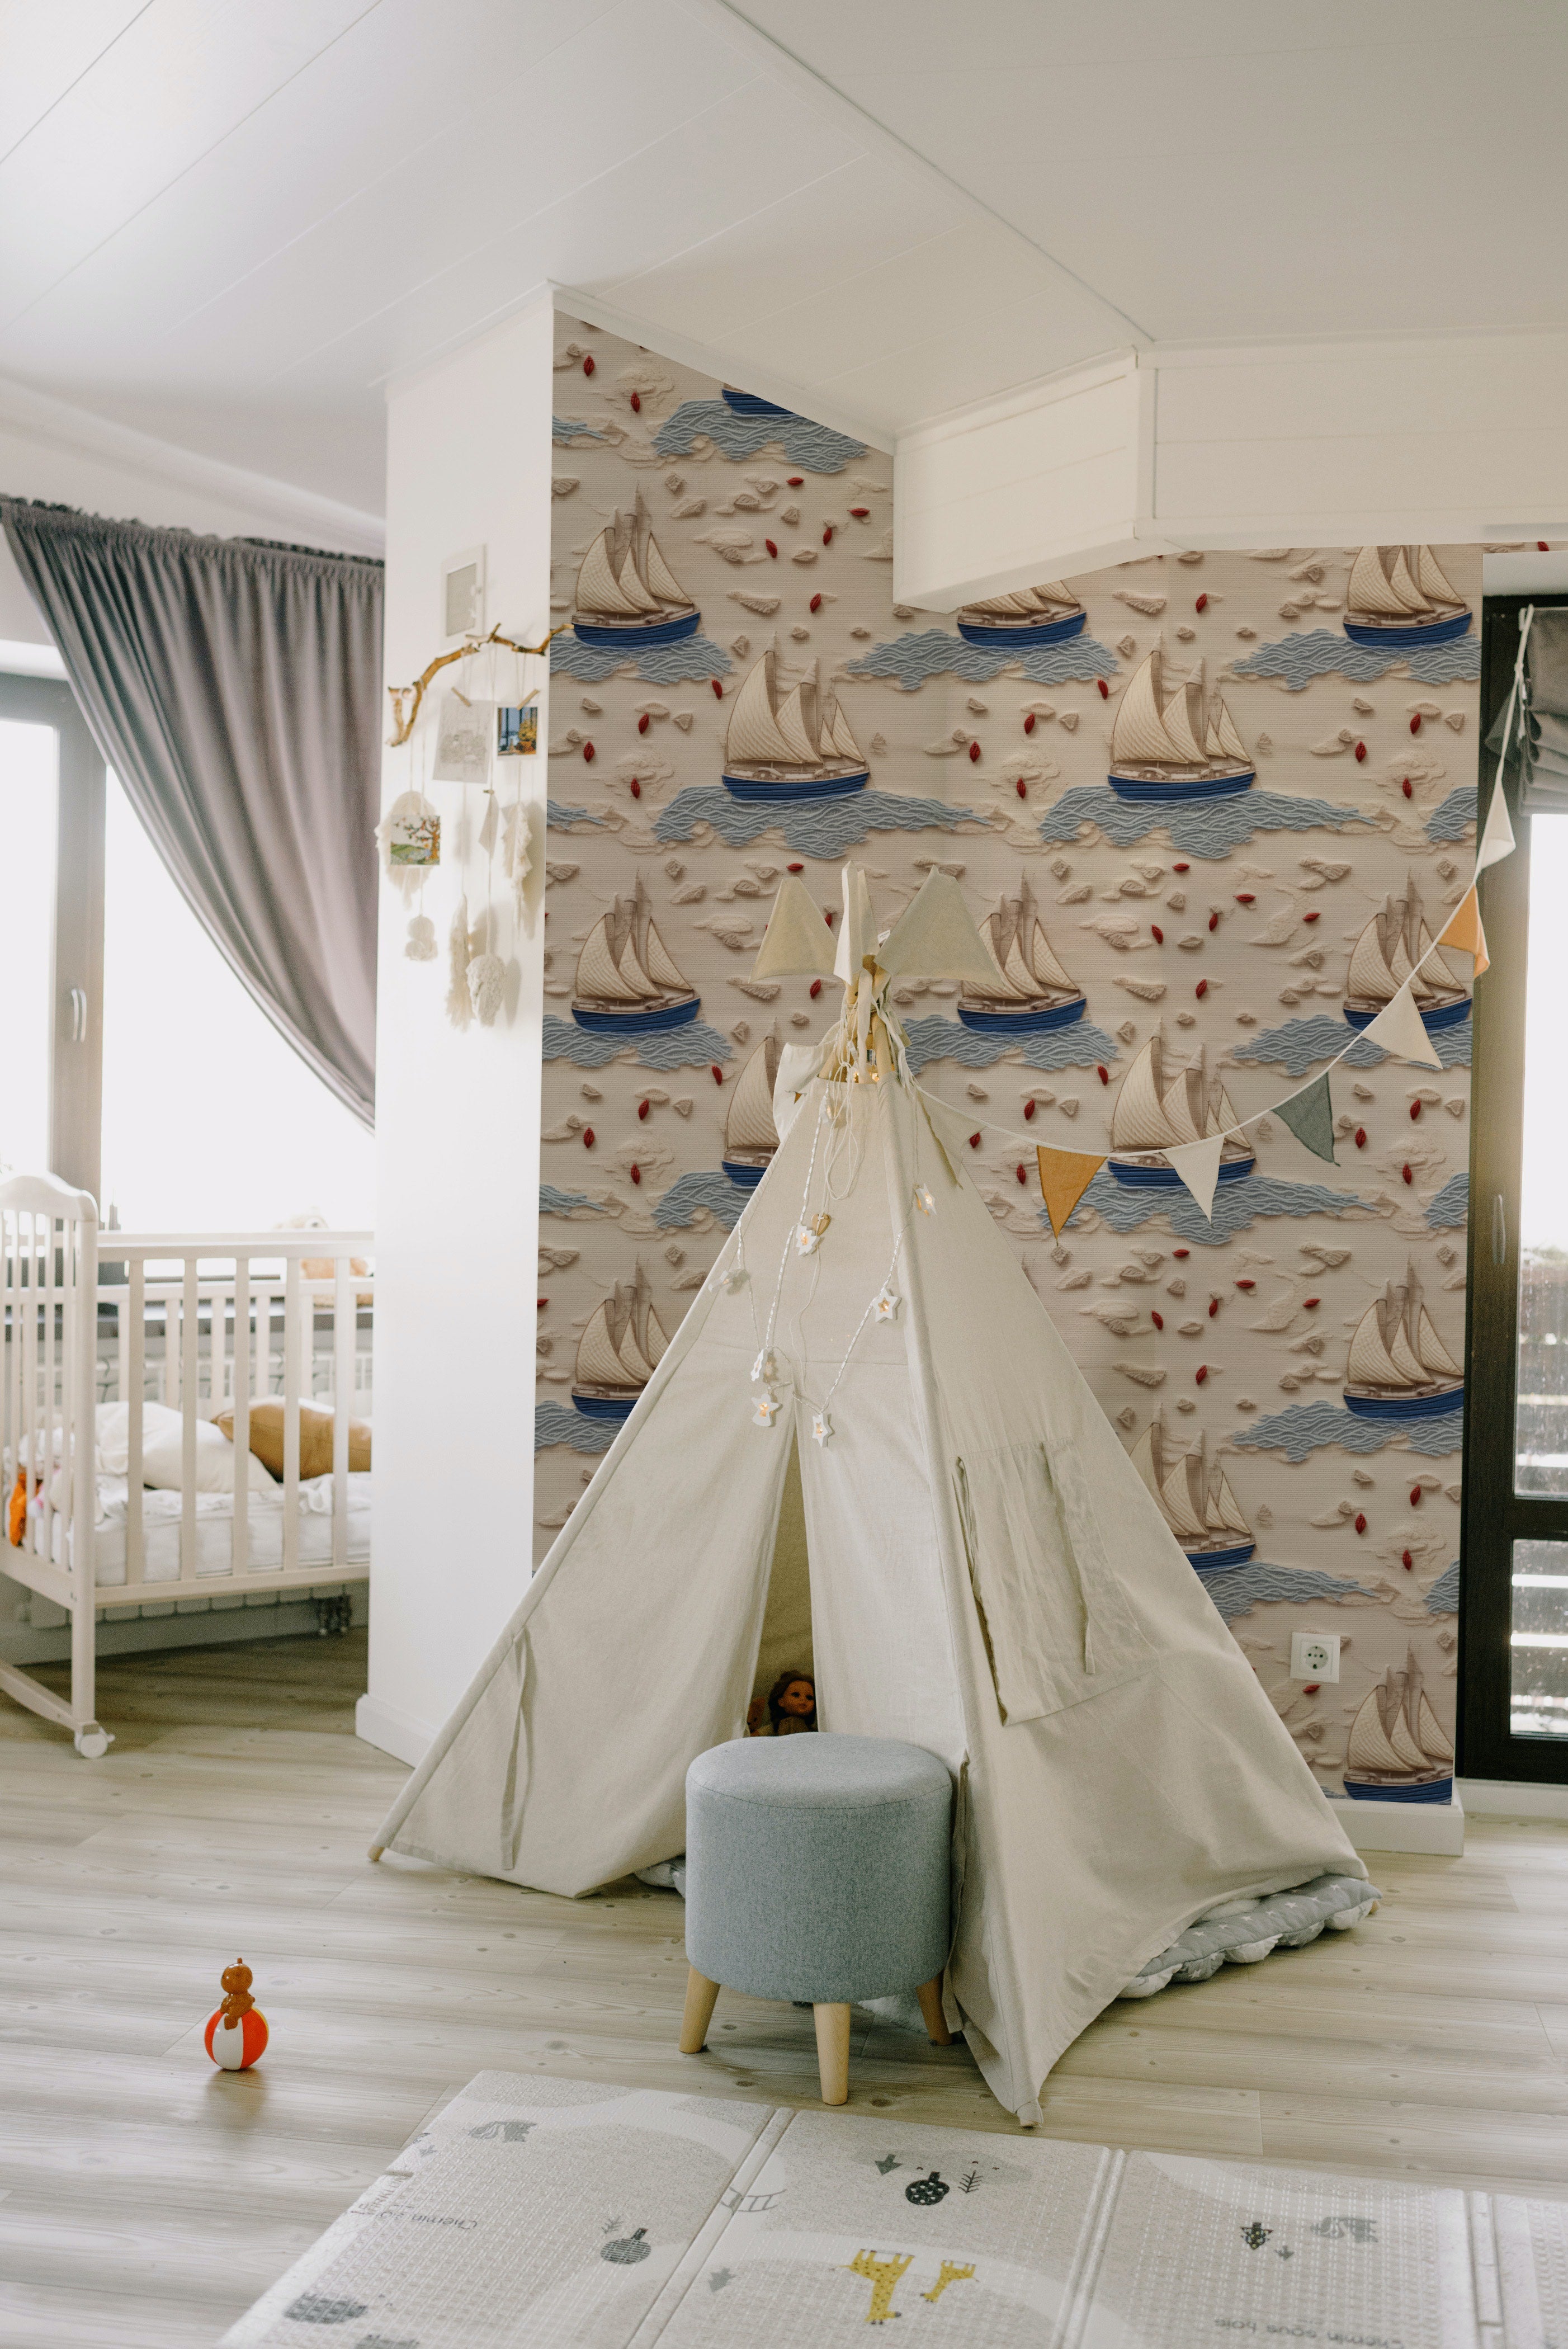 Design Inspiration for Nautical Themes: Transforming Your Child's Room into a Seaside Wonderland